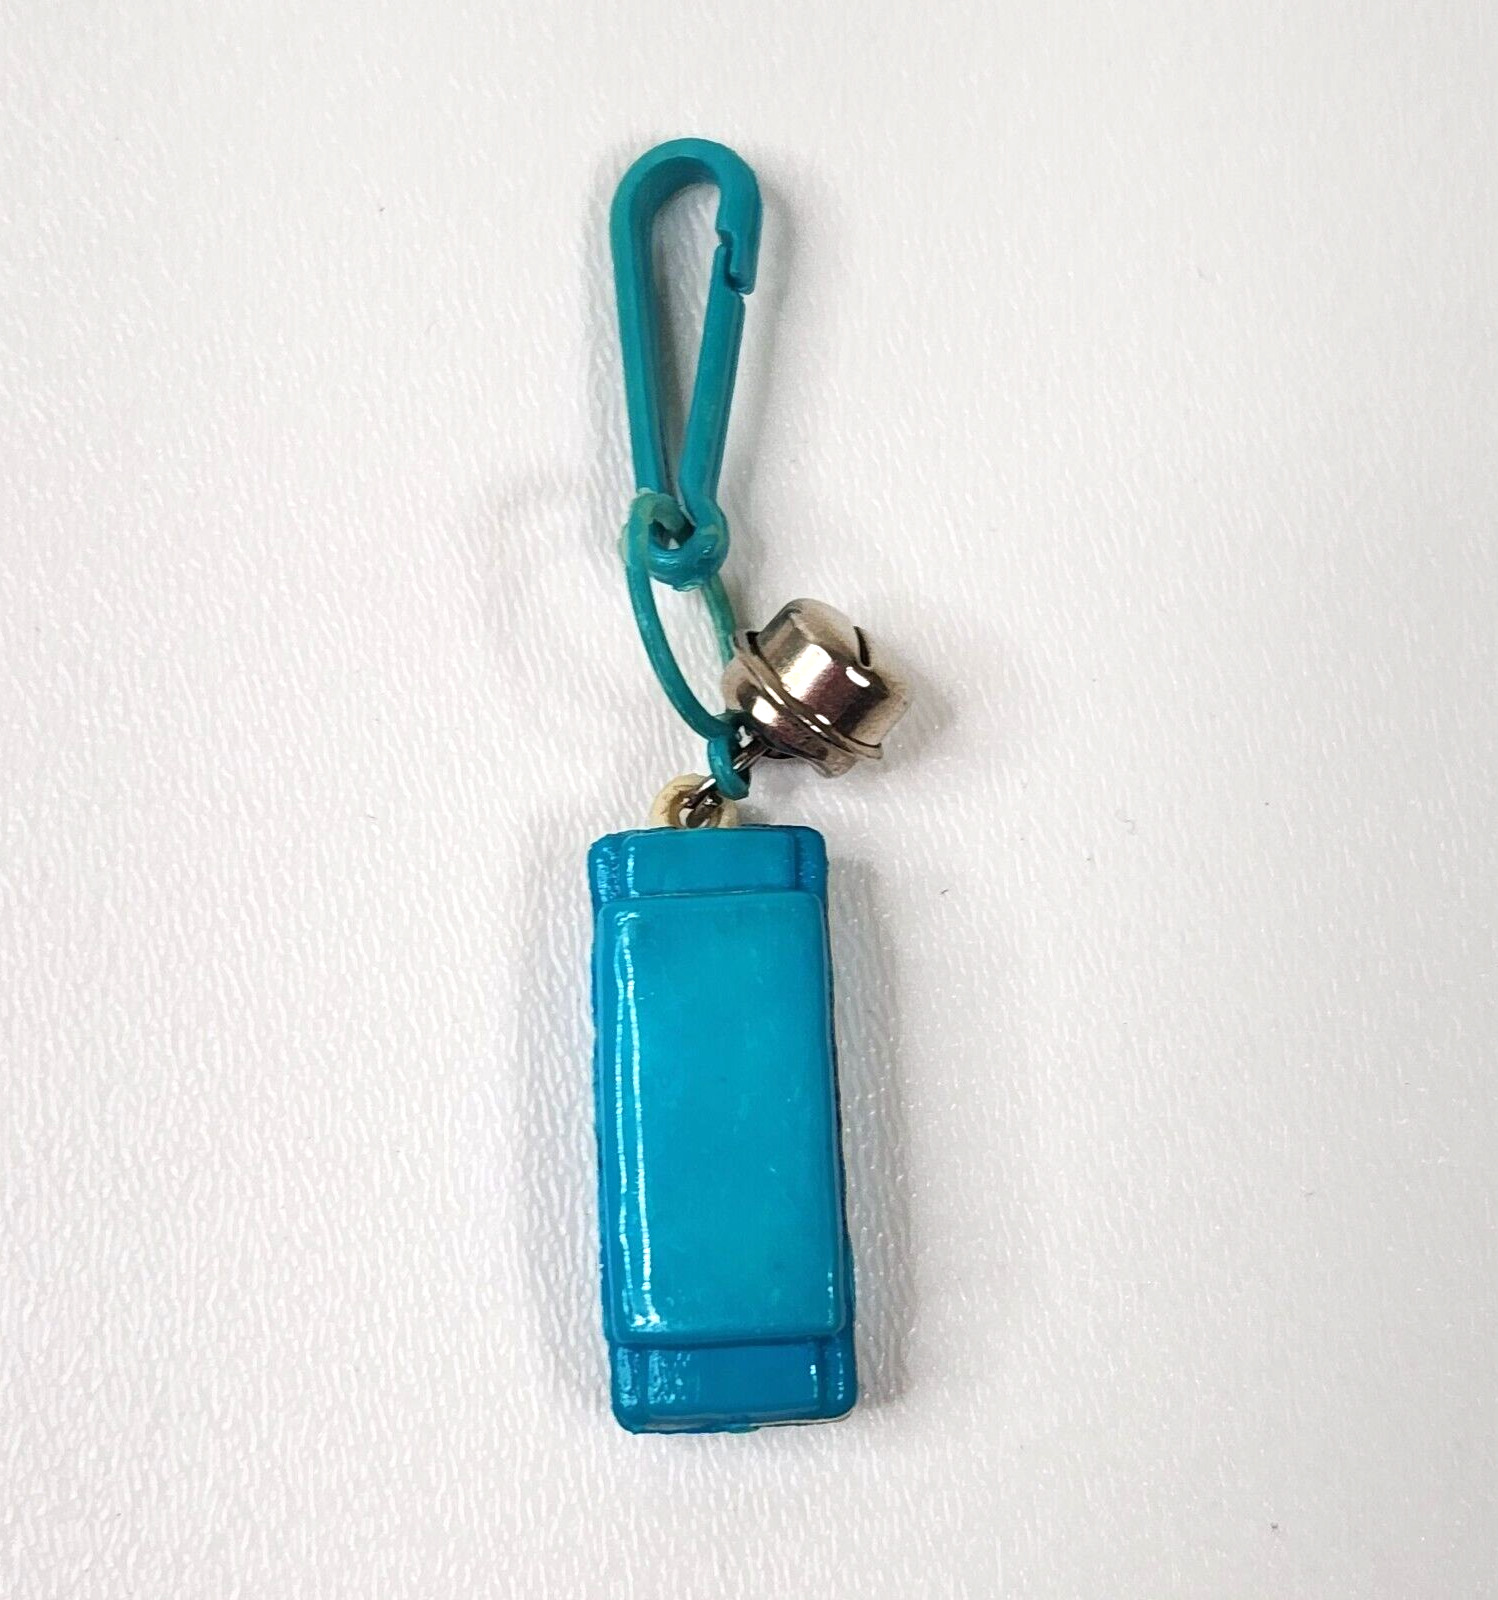 Vintage 1980s Plastic Bell Charm Harmonica For 80s Necklace